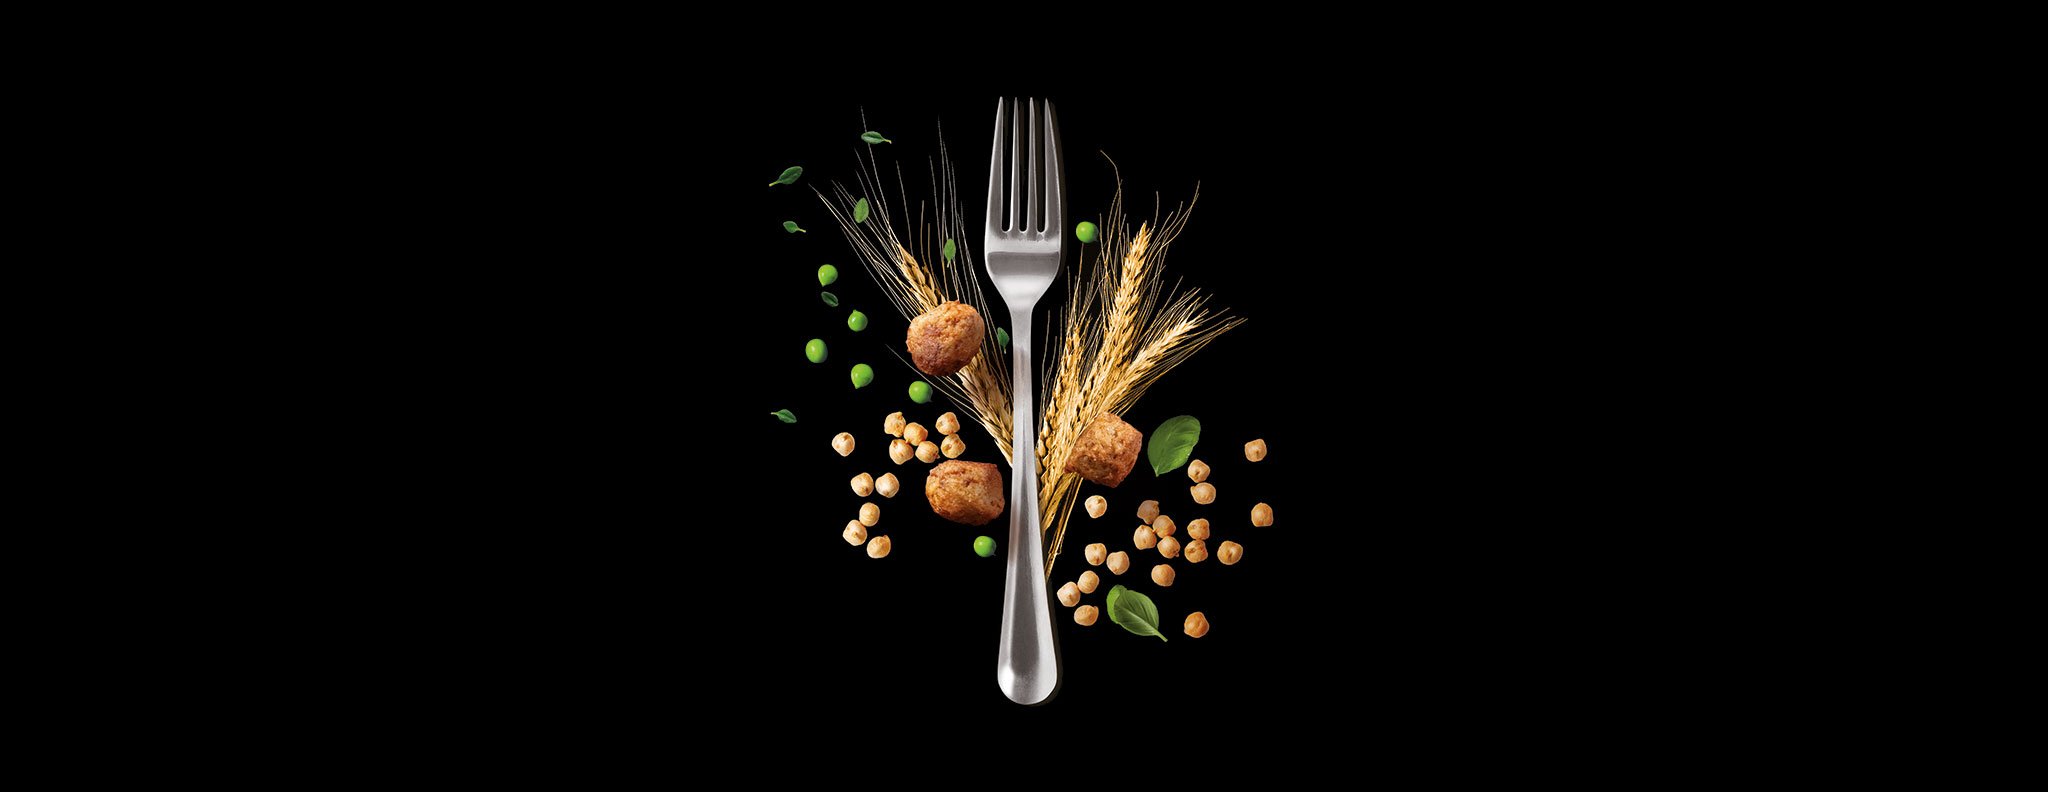 Givaudan publishes insights from Givaudan’s Chef’s Council 2019 